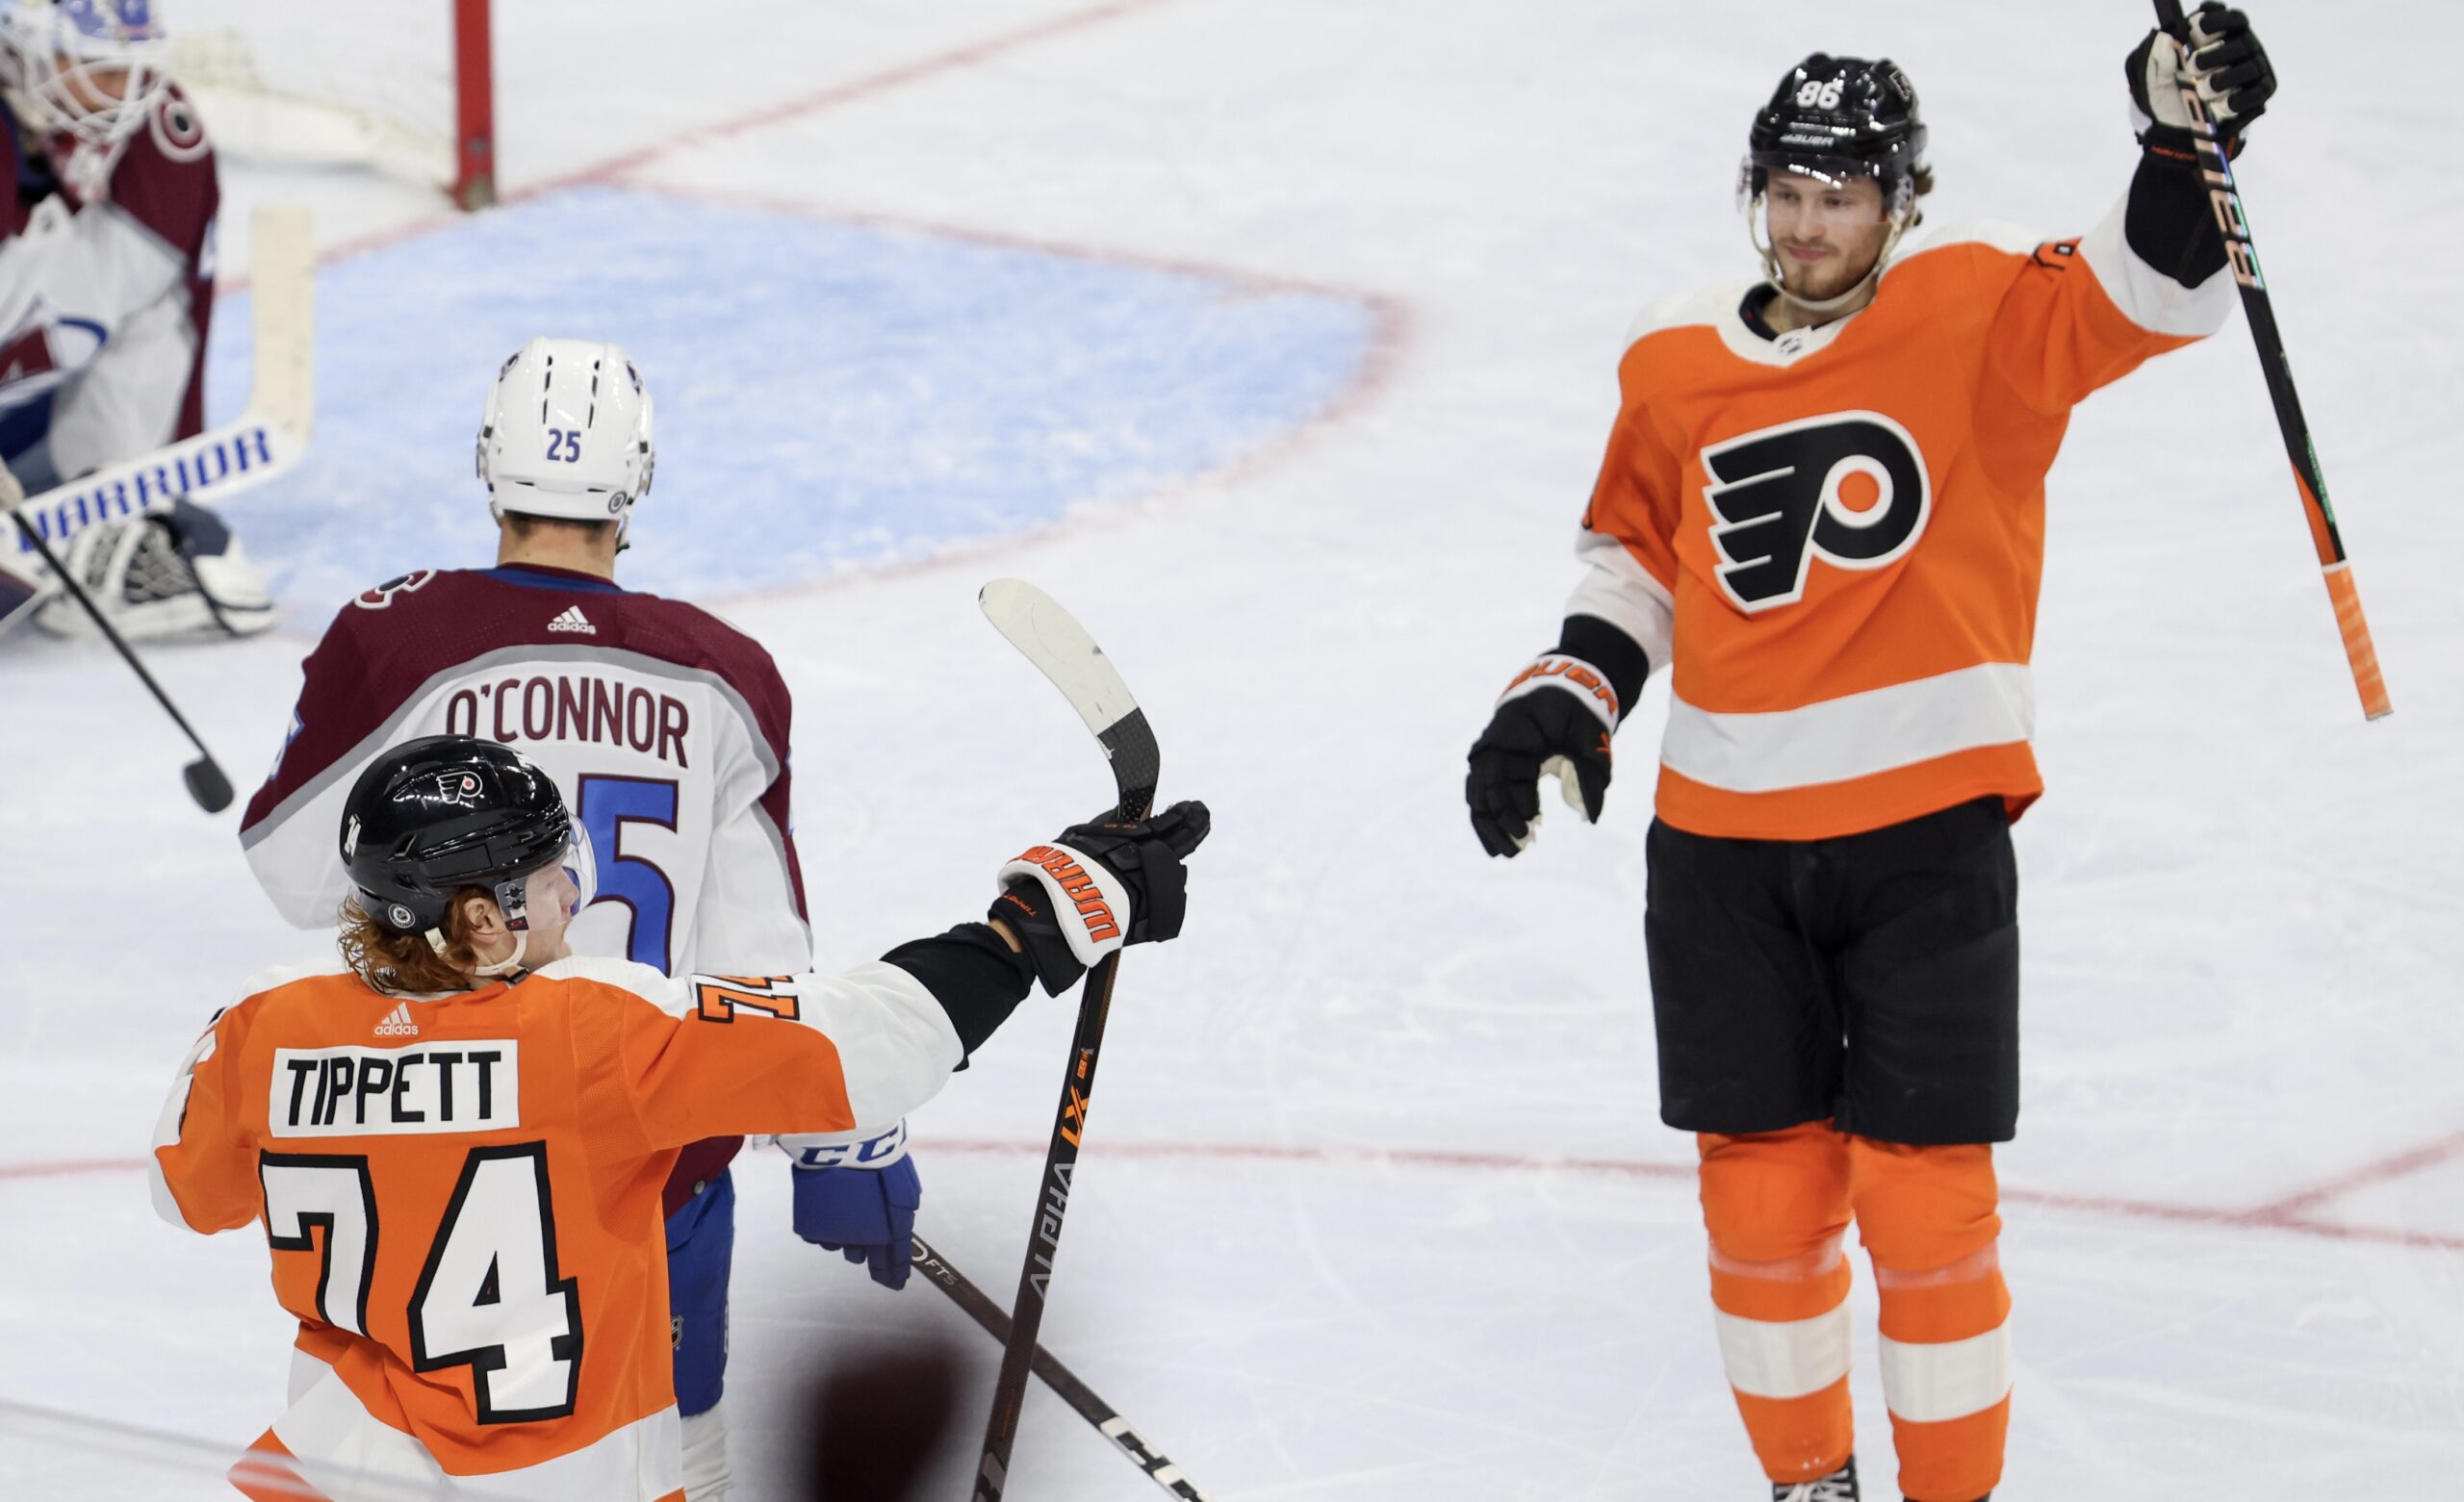 Flyers F Sean Couturier Out At Least 2 Weeks